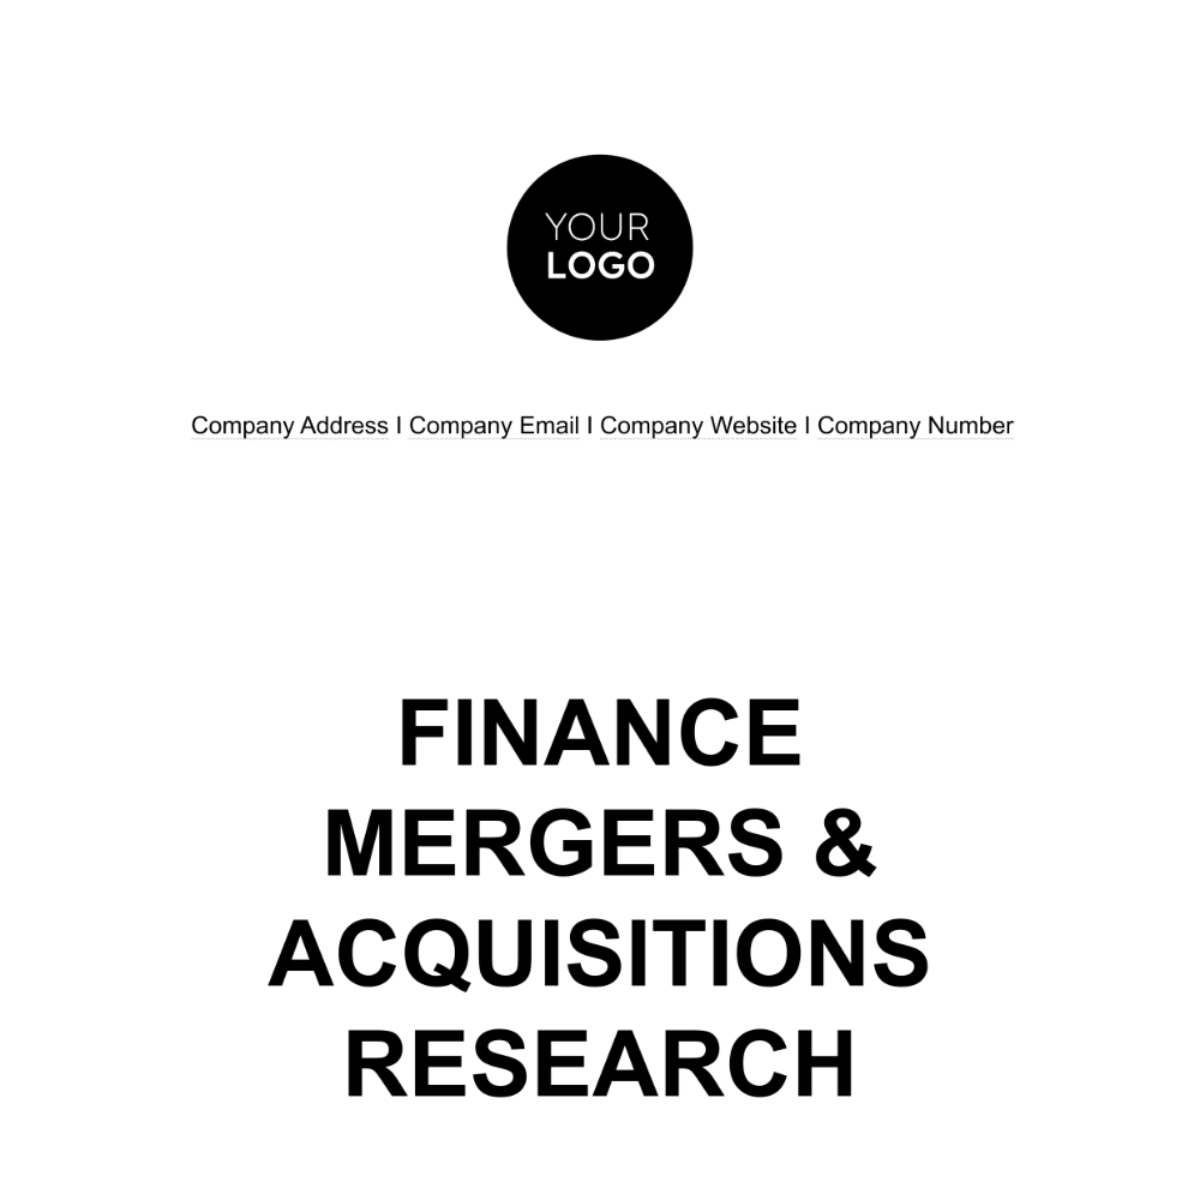 Finance Mergers & Acquisitions Research Template